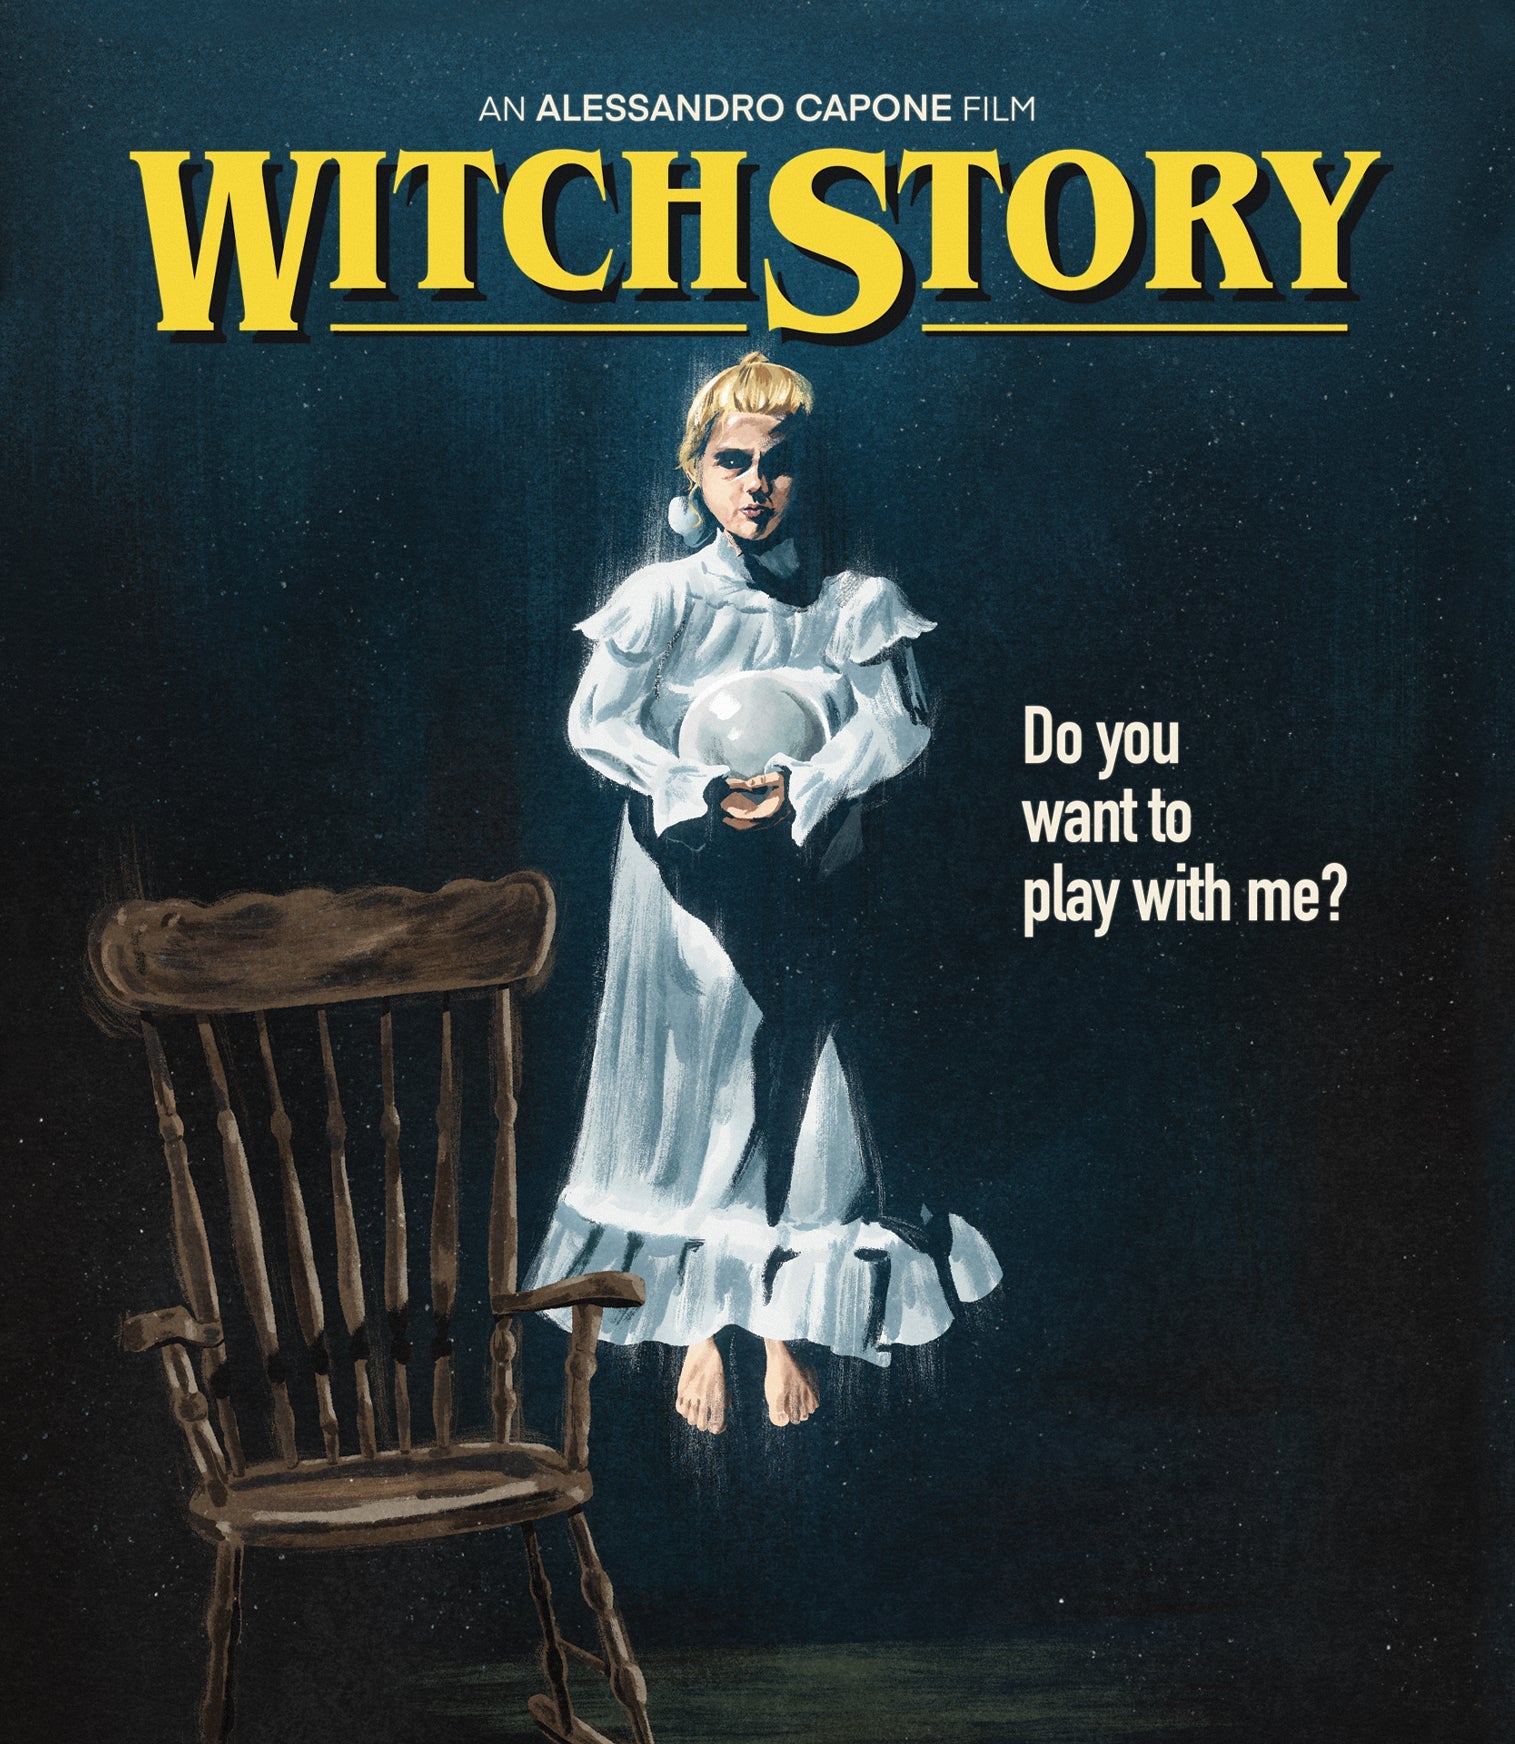 WITCH STORY (LIMITED EDITION) 4K UHD/BLU-RAY [PRE-ORDER]